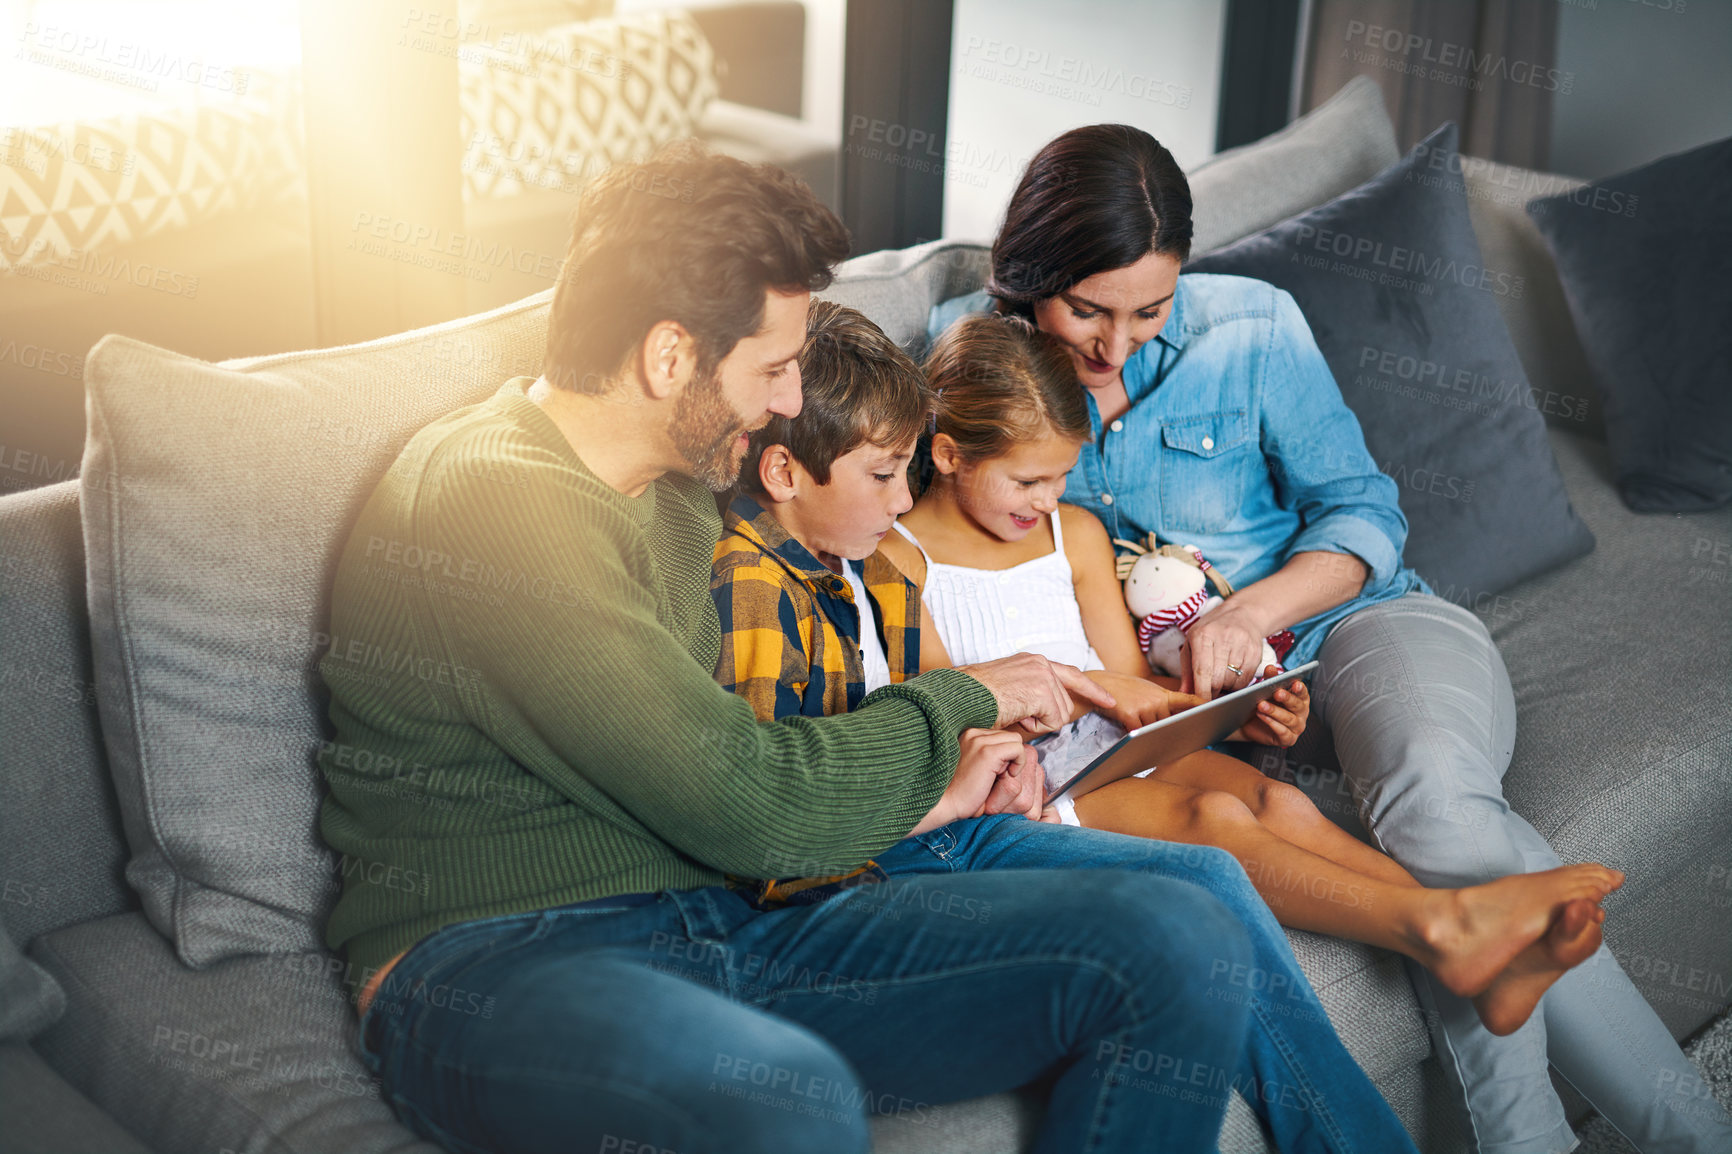 Buy stock photo Cropped shot of a young family using a tablet and chilling on the sofa together at home